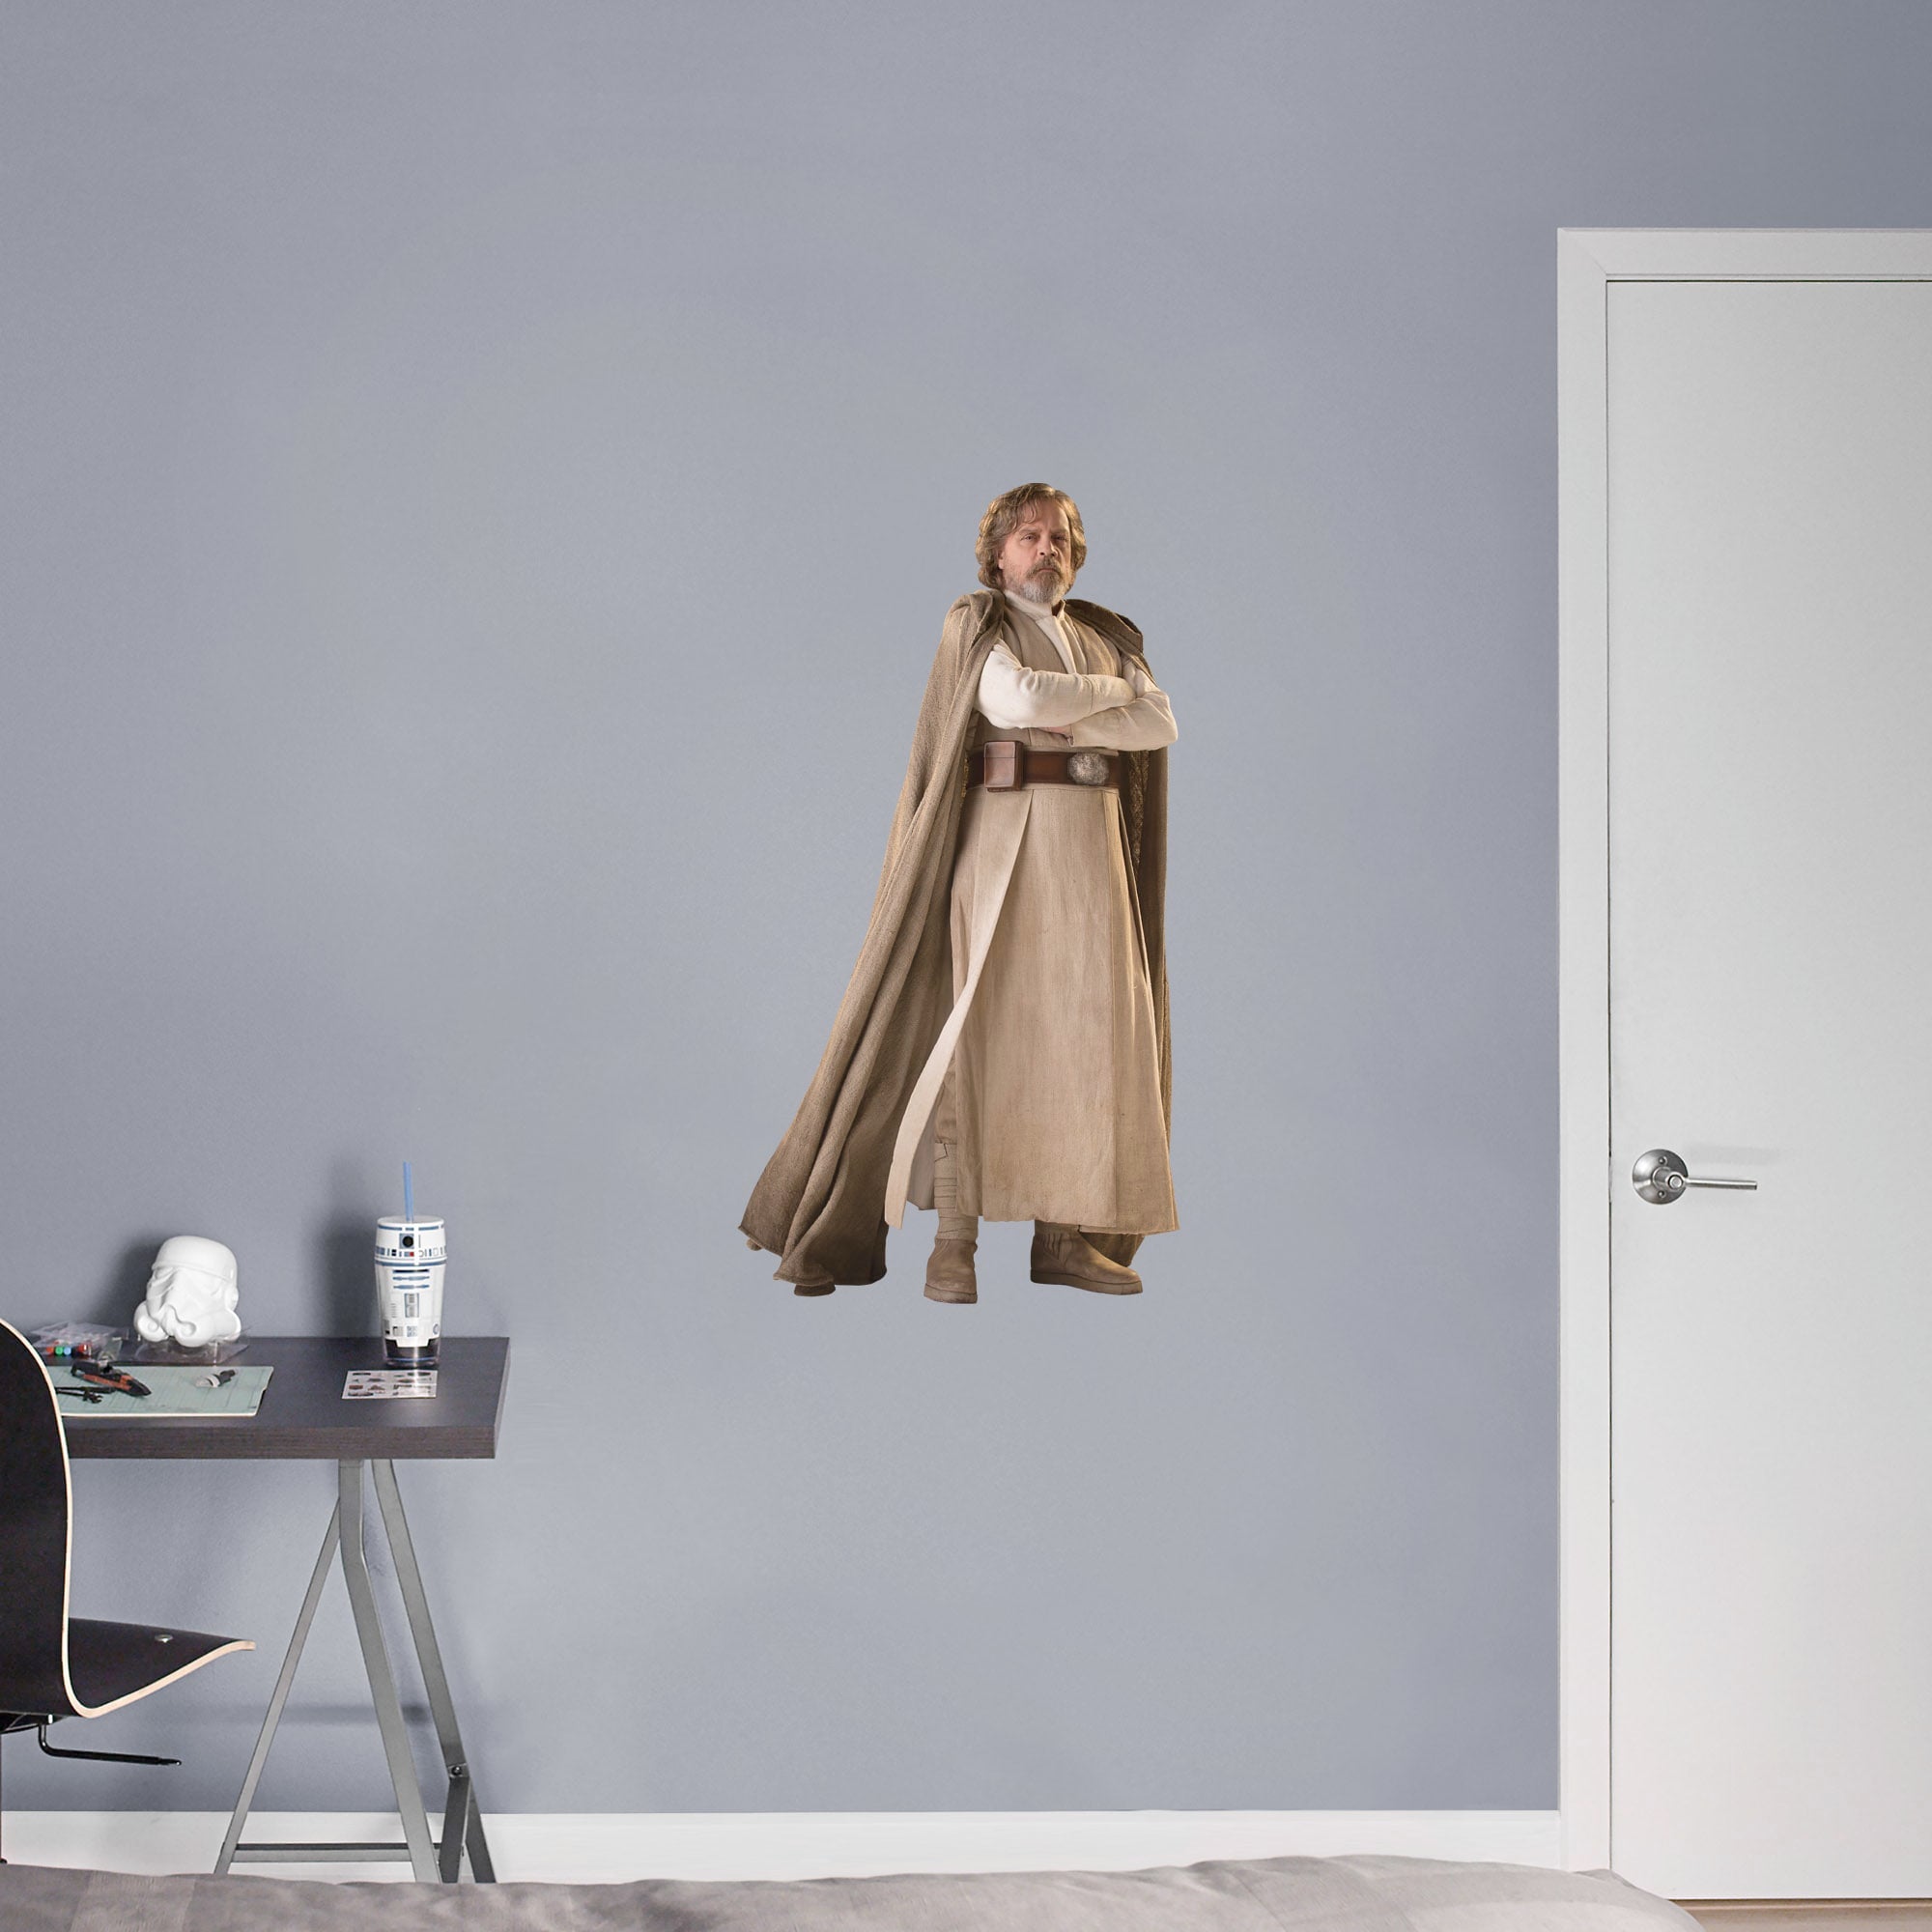 Luke Skywalker: Jedi Master - Officially Licensed Removable Wall Decal XL by Fathead | Vinyl